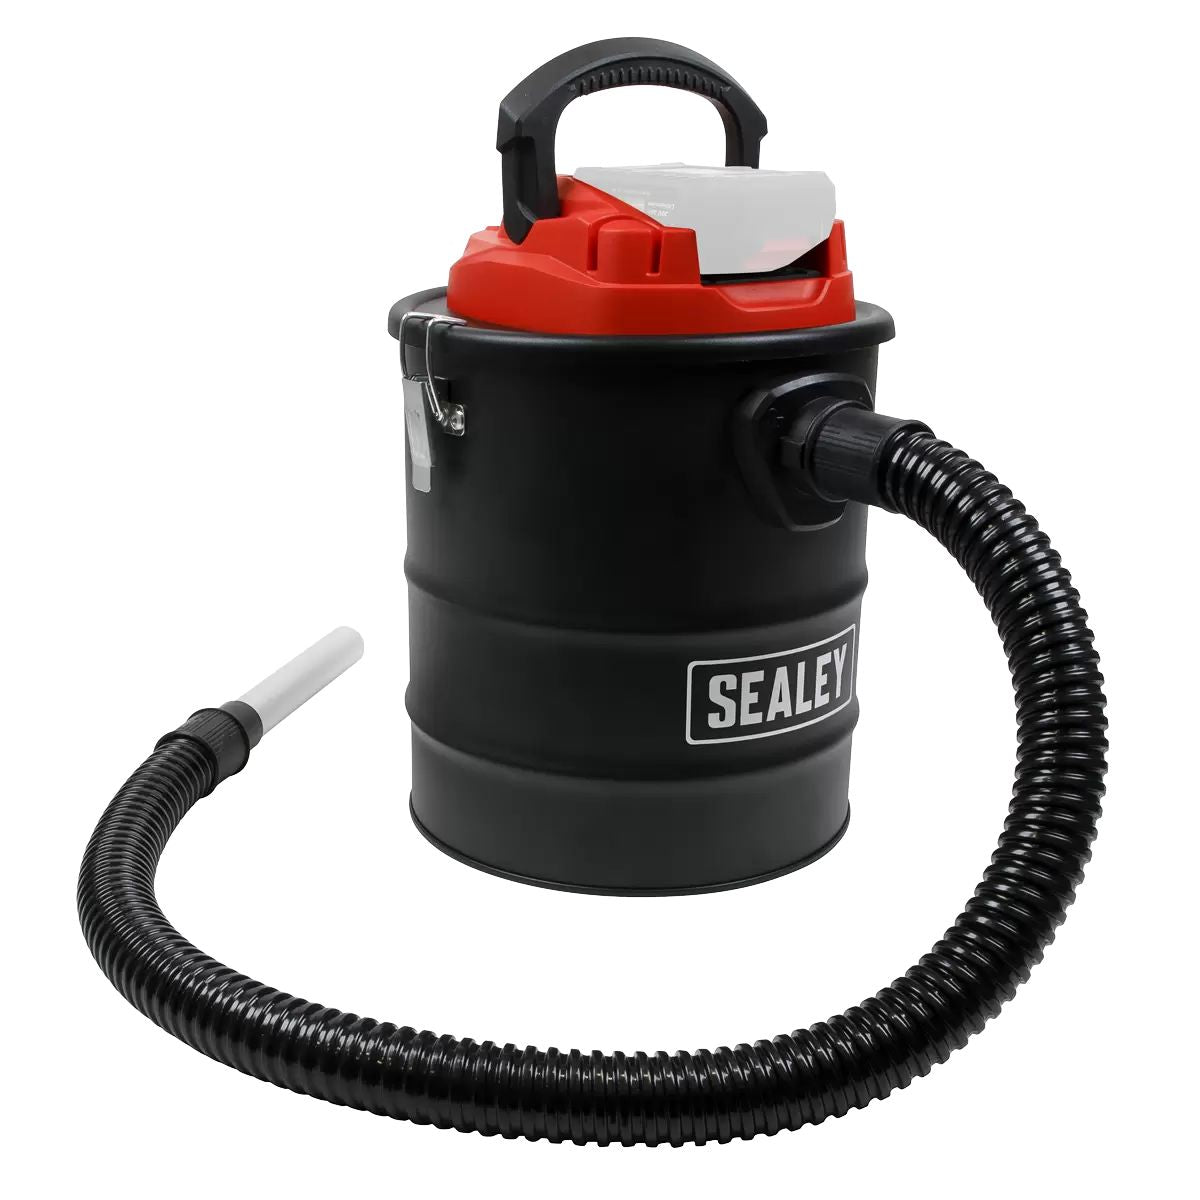 Sealey CP20VAVKIT1 20V Handheld Ash 15L Vacuum Cleaner Kit With Battery & Charger